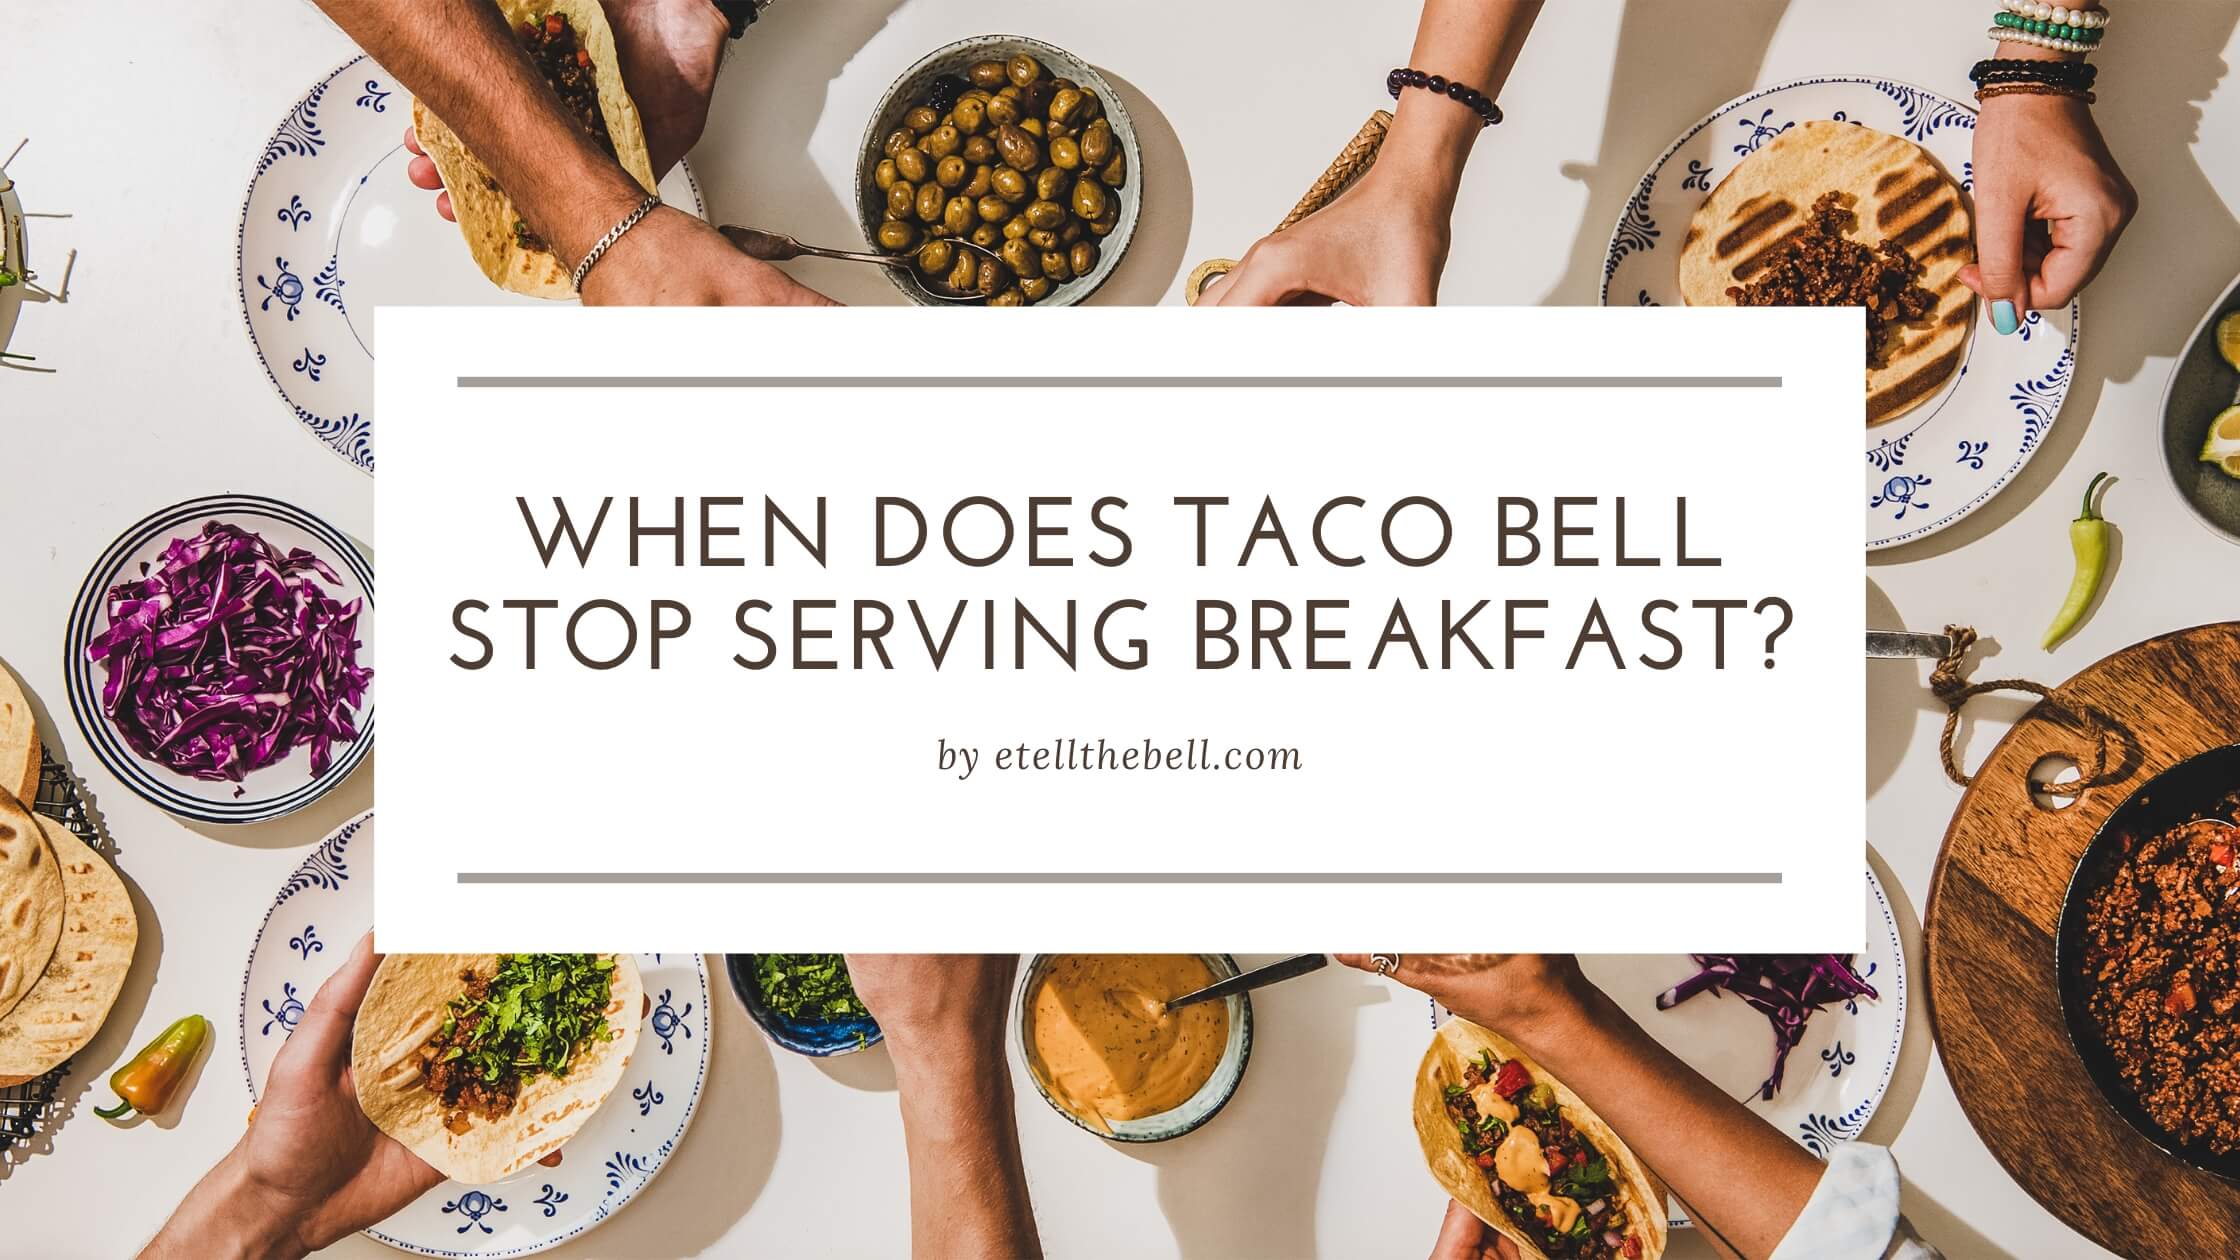 When Does Taco Bell Stop Serving Breakfast